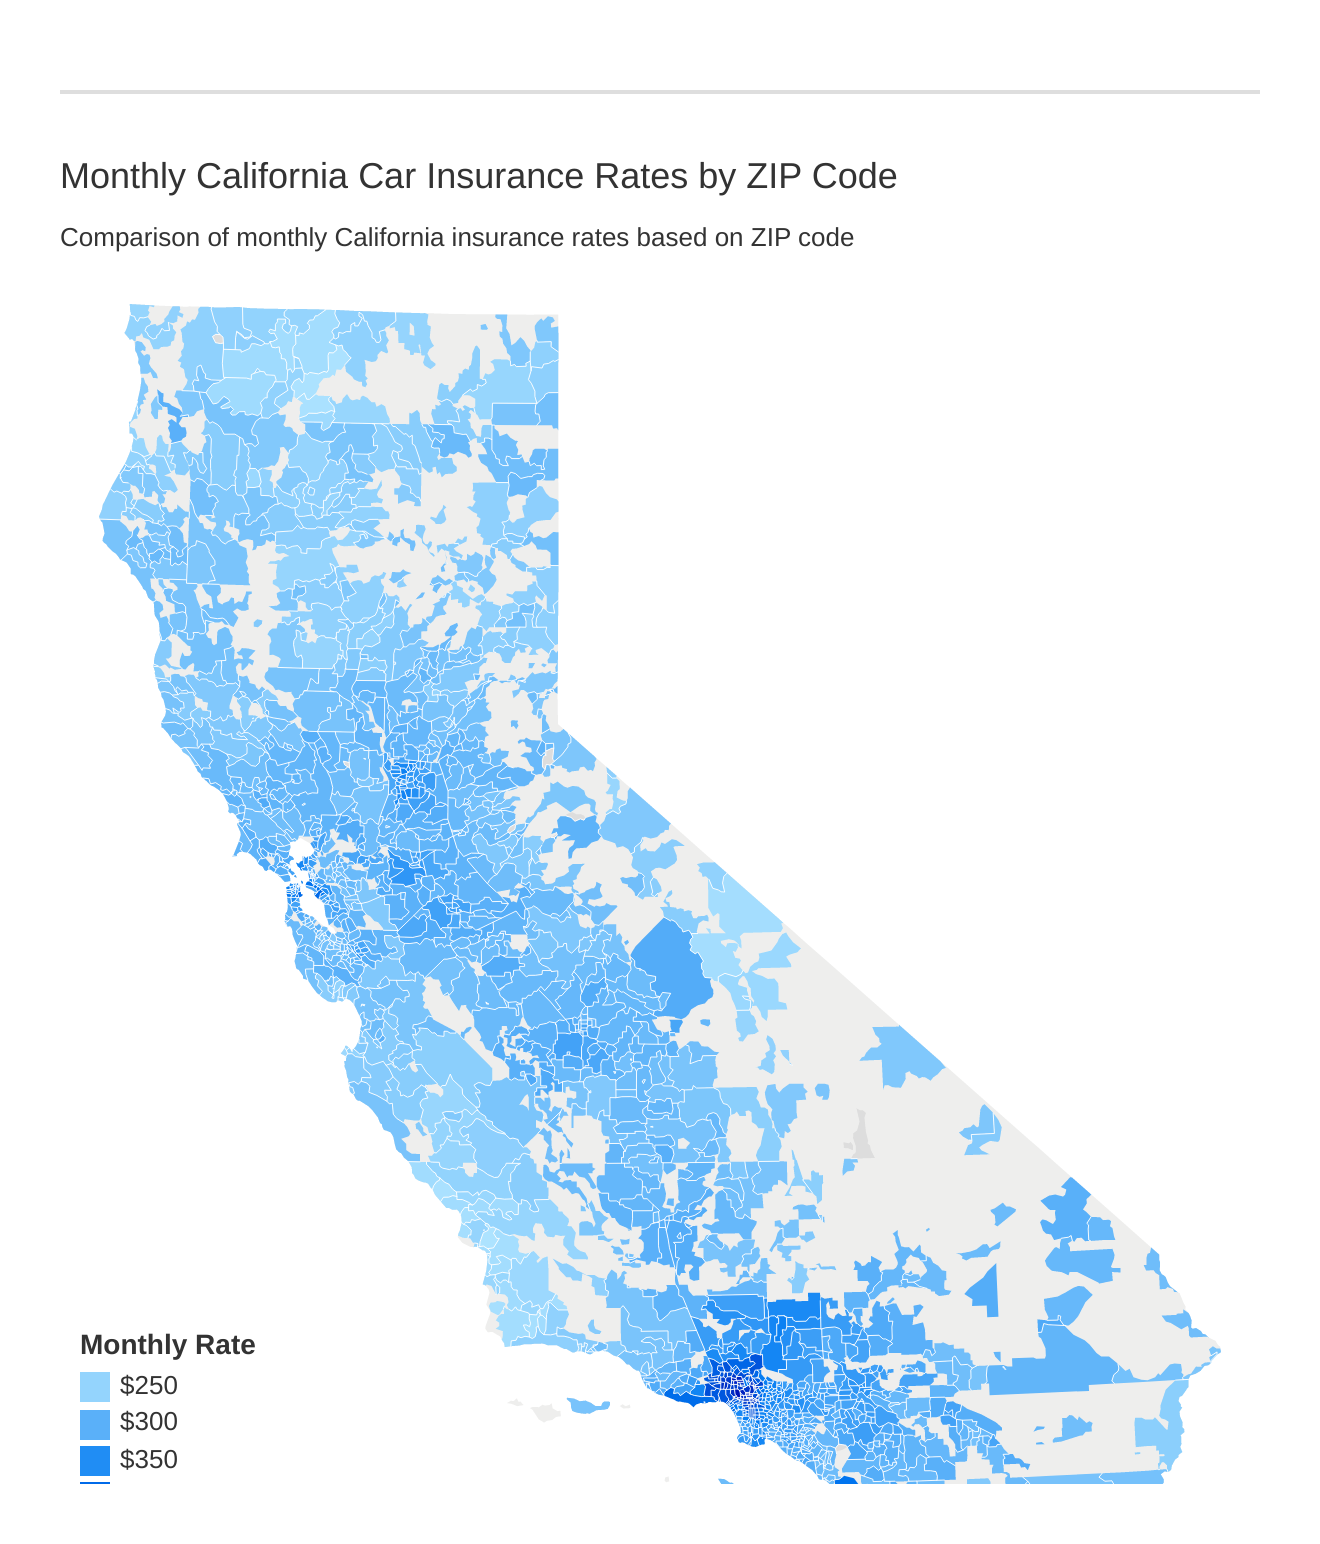 Monthly California Car Insurance Rates by ZIP Code